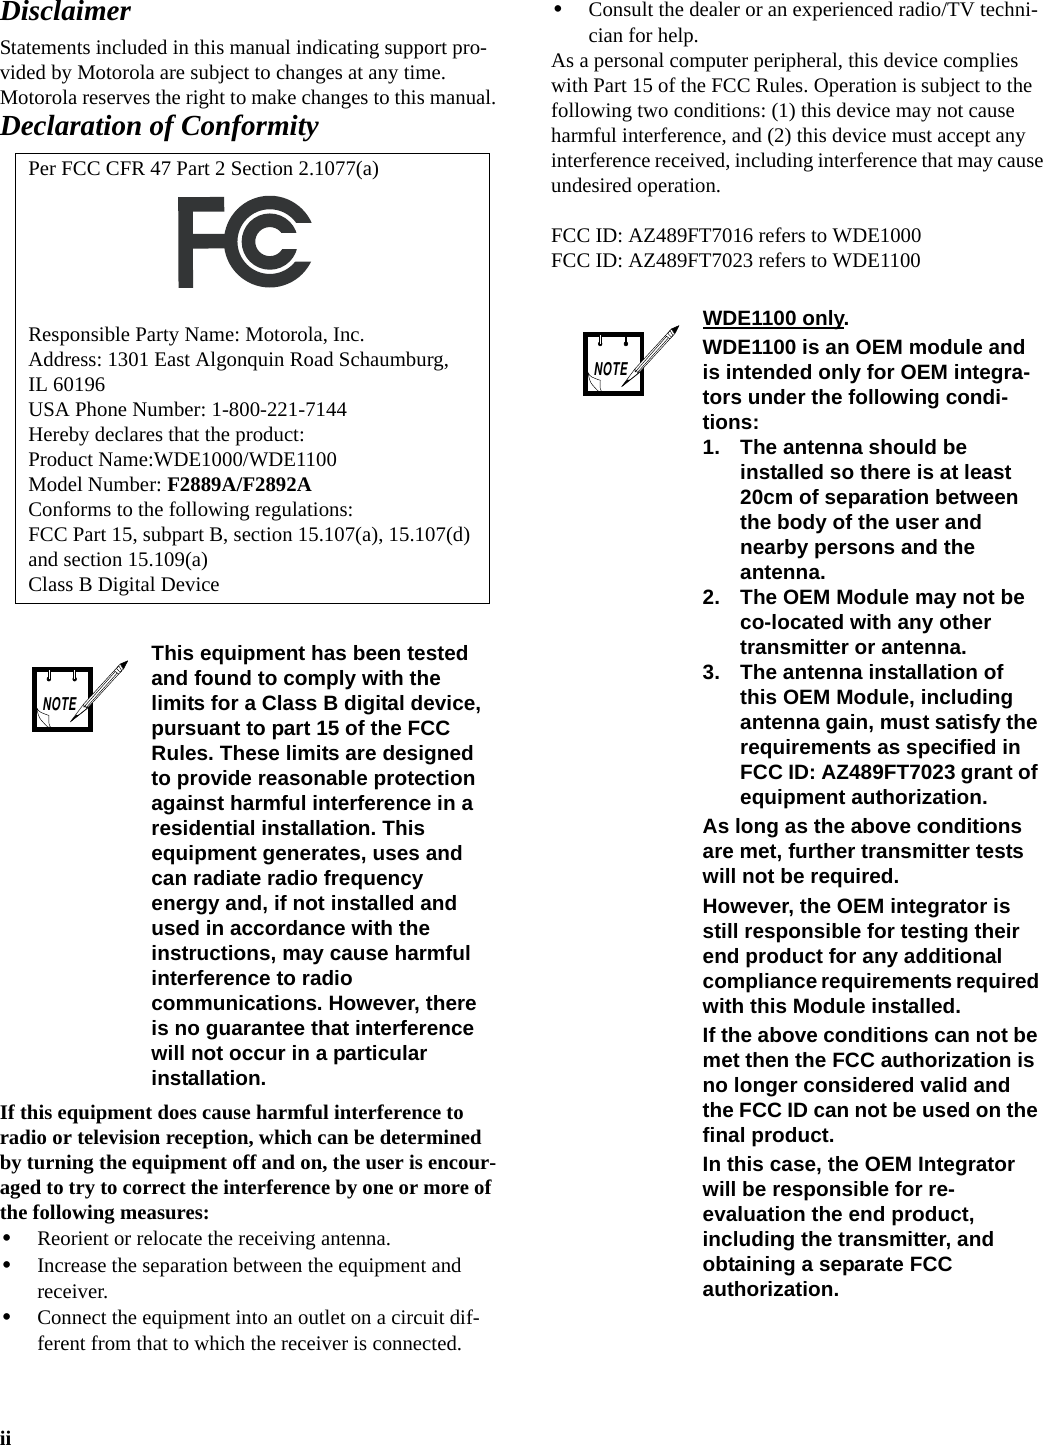 iiDisclaimerStatements included in this manual indicating support pro-vided by Motorola are subject to changes at any time. Motorola reserves the right to make changes to this manual.Declaration of ConformityIf this equipment does cause harmful interference to radio or television reception, which can be determined by turning the equipment off and on, the user is encour-aged to try to correct the interference by one or more of the following measures:•Reorient or relocate the receiving antenna.•Increase the separation between the equipment and receiver.•Connect the equipment into an outlet on a circuit dif-ferent from that to which the receiver is connected.•Consult the dealer or an experienced radio/TV techni-cian for help.As a personal computer peripheral, this device complies with Part 15 of the FCC Rules. Operation is subject to the following two conditions: (1) this device may not cause harmful interference, and (2) this device must accept any interference received, including interference that may cause undesired operation.FCC ID: AZ489FT7016 refers to WDE1000FCC ID: AZ489FT7023 refers to WDE1100Per FCC CFR 47 Part 2 Section 2.1077(a)Responsible Party Name: Motorola, Inc.Address: 1301 East Algonquin Road Schaumburg, IL 60196 USA Phone Number: 1-800-221-7144Hereby declares that the product:Product Name:WDE1000/WDE1100Model Number: F2889A/F2892AConforms to the following regulations:FCC Part 15, subpart B, section 15.107(a), 15.107(d) and section 15.109(a)Class B Digital DeviceThis equipment has been tested and found to comply with the limits for a Class B digital device, pursuant to part 15 of the FCC Rules. These limits are designed to provide reasonable protection against harmful interference in a residential installation. This equipment generates, uses and can radiate radio frequency energy and, if not installed and used in accordance with the instructions, may cause harmful interference to radio communications. However, there is no guarantee that interference will not occur in a particular installation.NOTEWDE1100 only.WDE1100 is an OEM module and is intended only for OEM integra-tors under the following condi-tions:1. The antenna should be installed so there is at least 20cm of separation between the body of the user and nearby persons and the antenna.2. The OEM Module may not be co-located with any other transmitter or antenna.3. The antenna installation of this OEM Module, including antenna gain, must satisfy the requirements as specified in FCC ID: AZ489FT7023 grant of equipment authorization.As long as the above conditions are met, further transmitter tests will not be required. However, the OEM integrator is still responsible for testing their end product for any additional compliance requirements required with this Module installed.If the above conditions can not be met then the FCC authorization is no longer considered valid and the FCC ID can not be used on the final product.In this case, the OEM Integrator will be responsible for re-evaluation the end product, including the transmitter, and obtaining a separate FCC authorization.NOTE